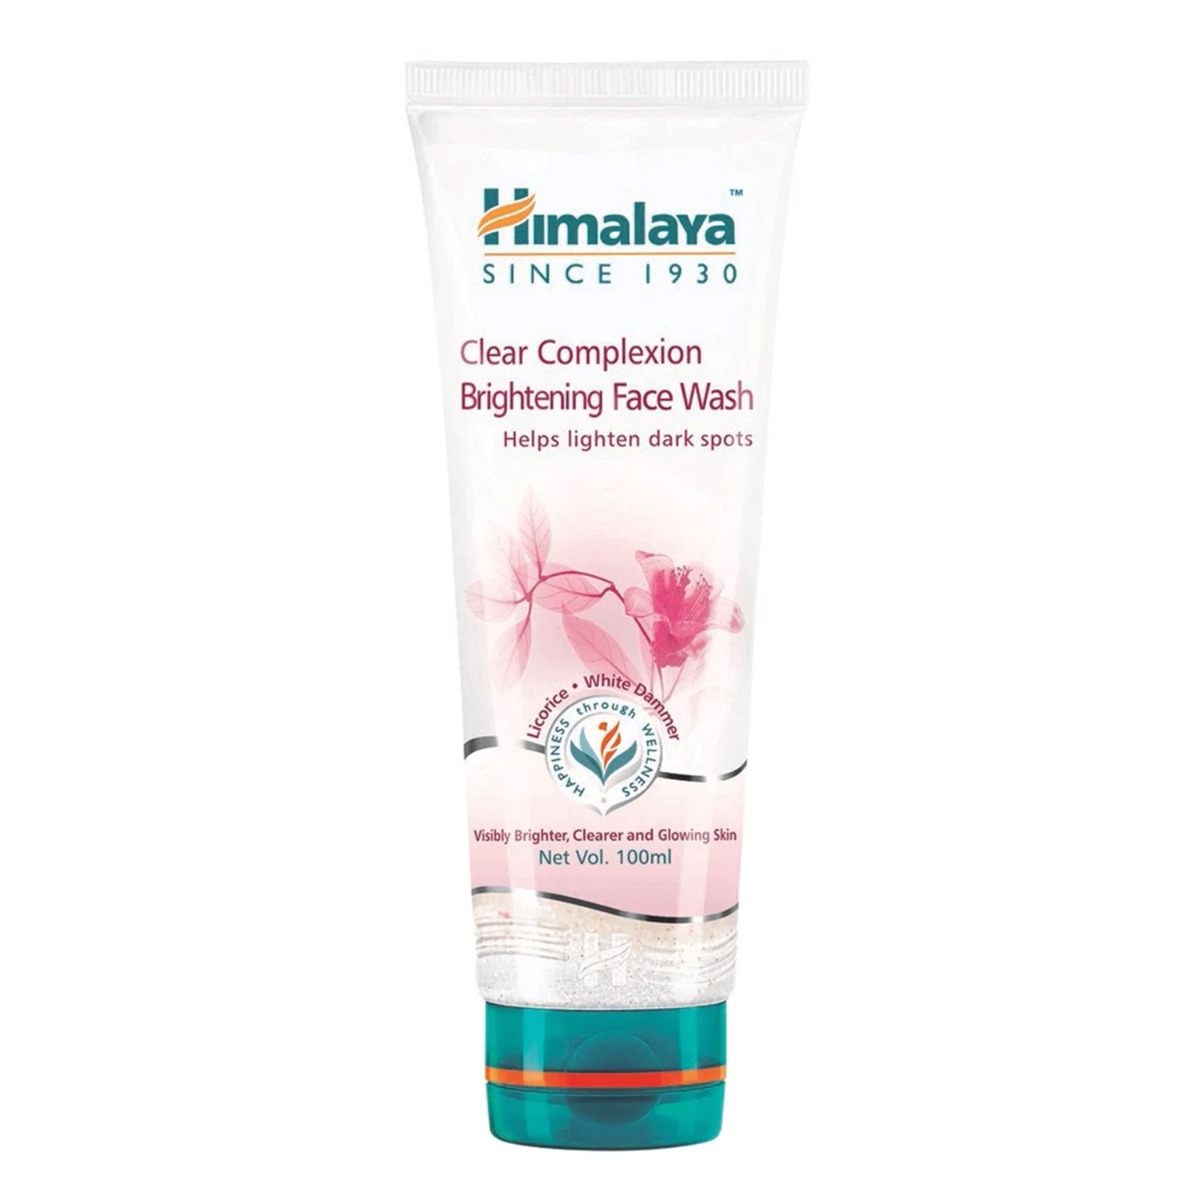 Himalaya Clear Complexion Brightening Face Wash, 100ml